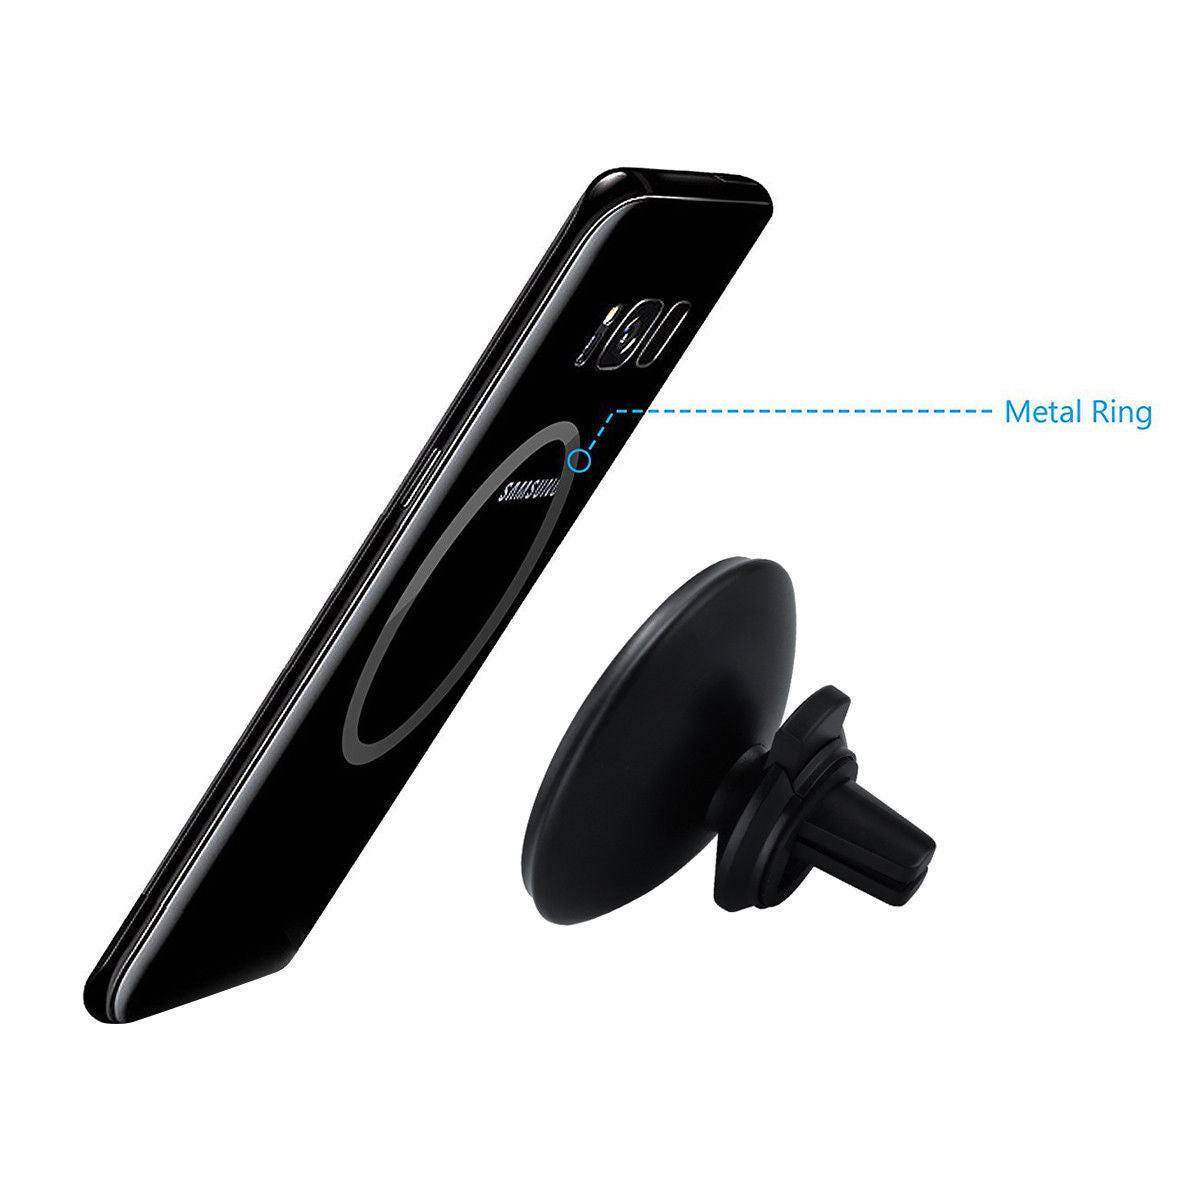 Fast Qi Wireless Car Charger Magnetic Air Vent Mount Holder For iPhone Samsung - Lifafa Denmark